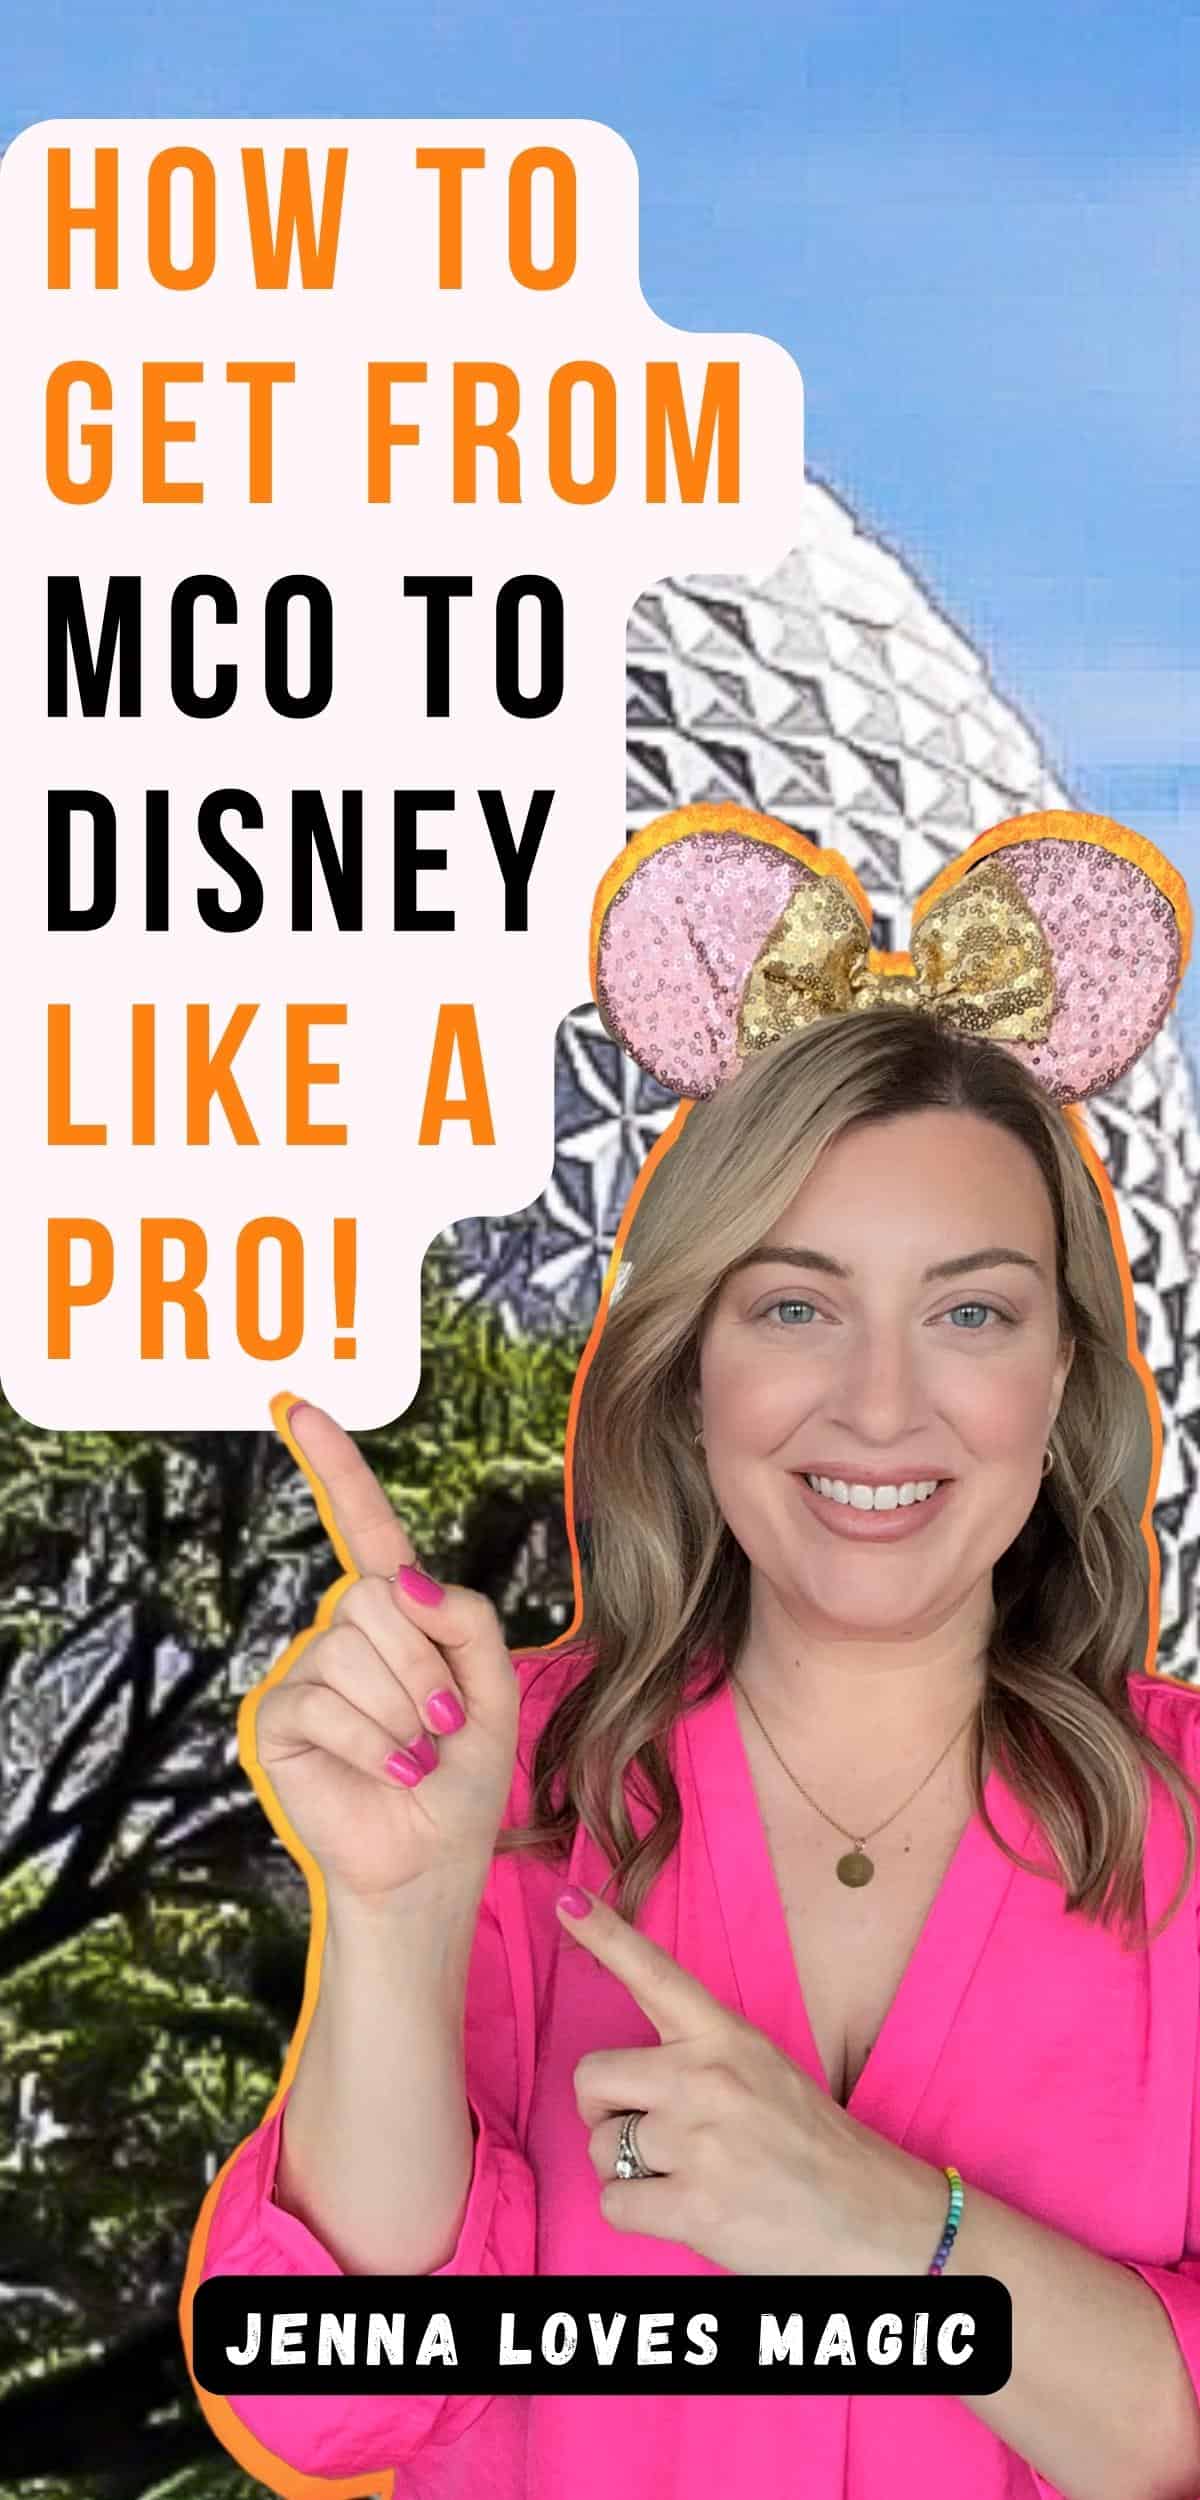 How to get from MCO to Disney with Uber with text overlay and Walt Disney Tourist and Jenna Loves Magic logo